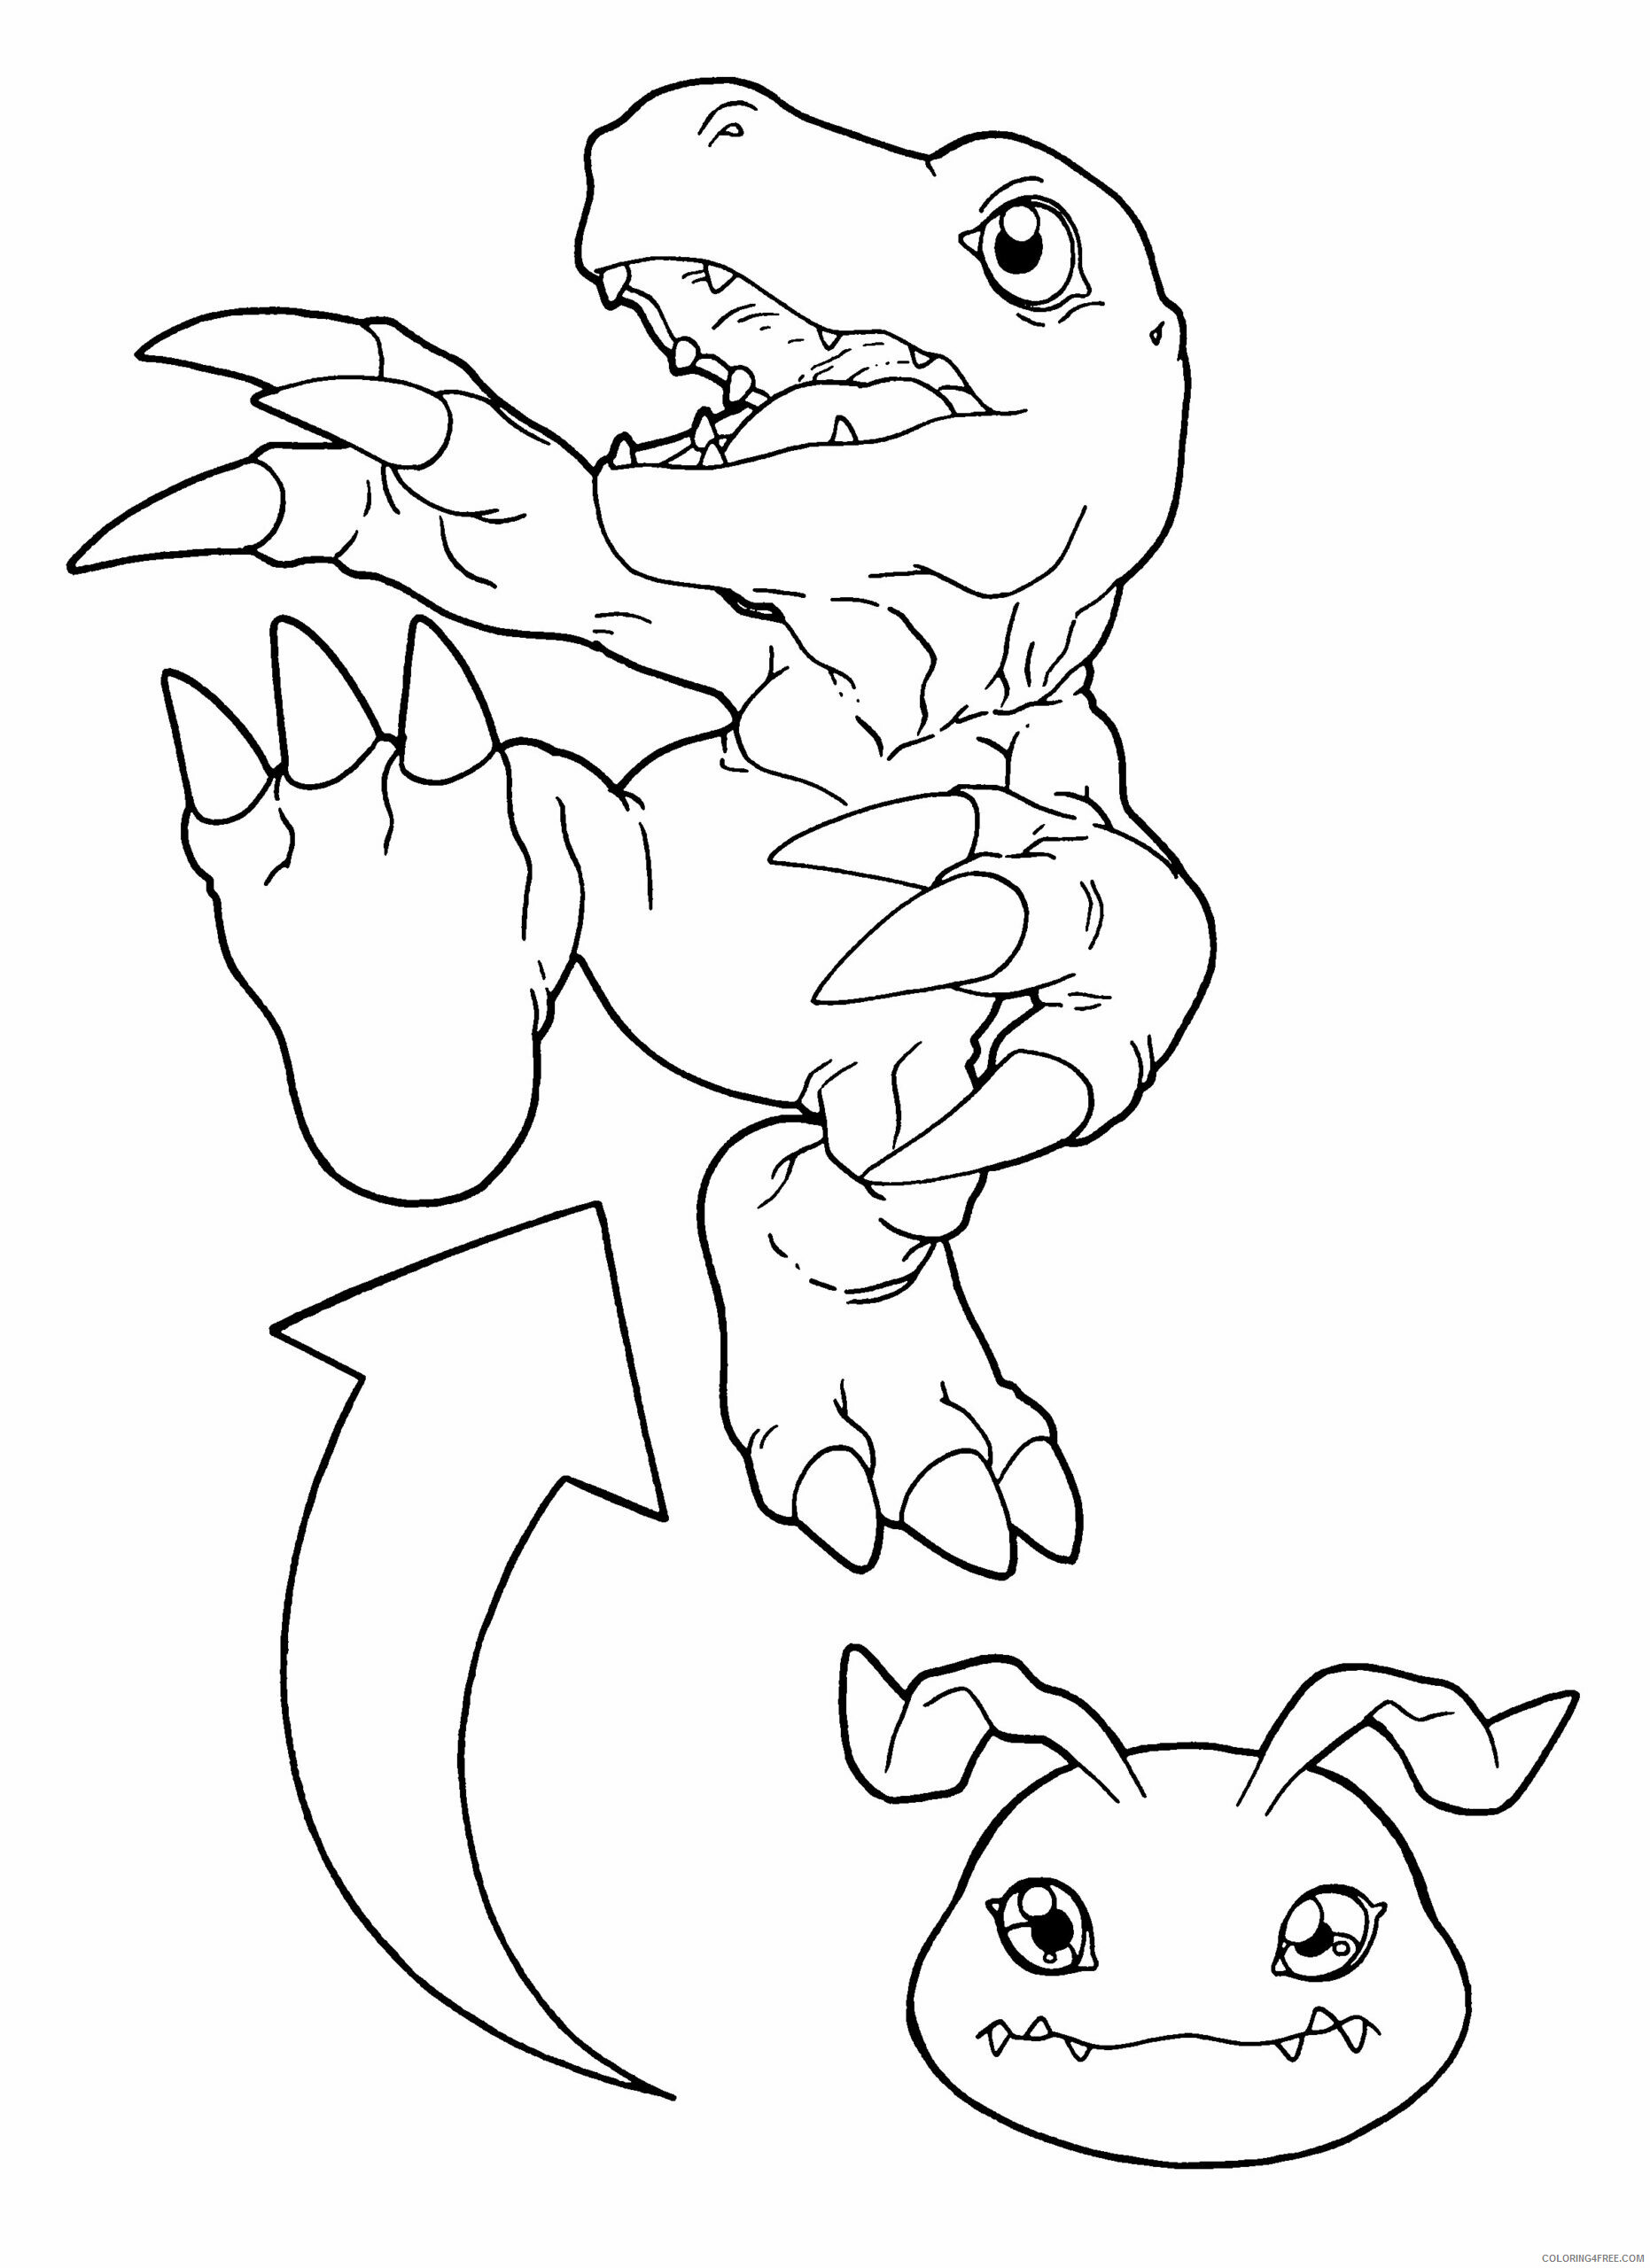 Digimon Printable Coloring Pages Anime digimon 99 2021 0396 Coloring4free